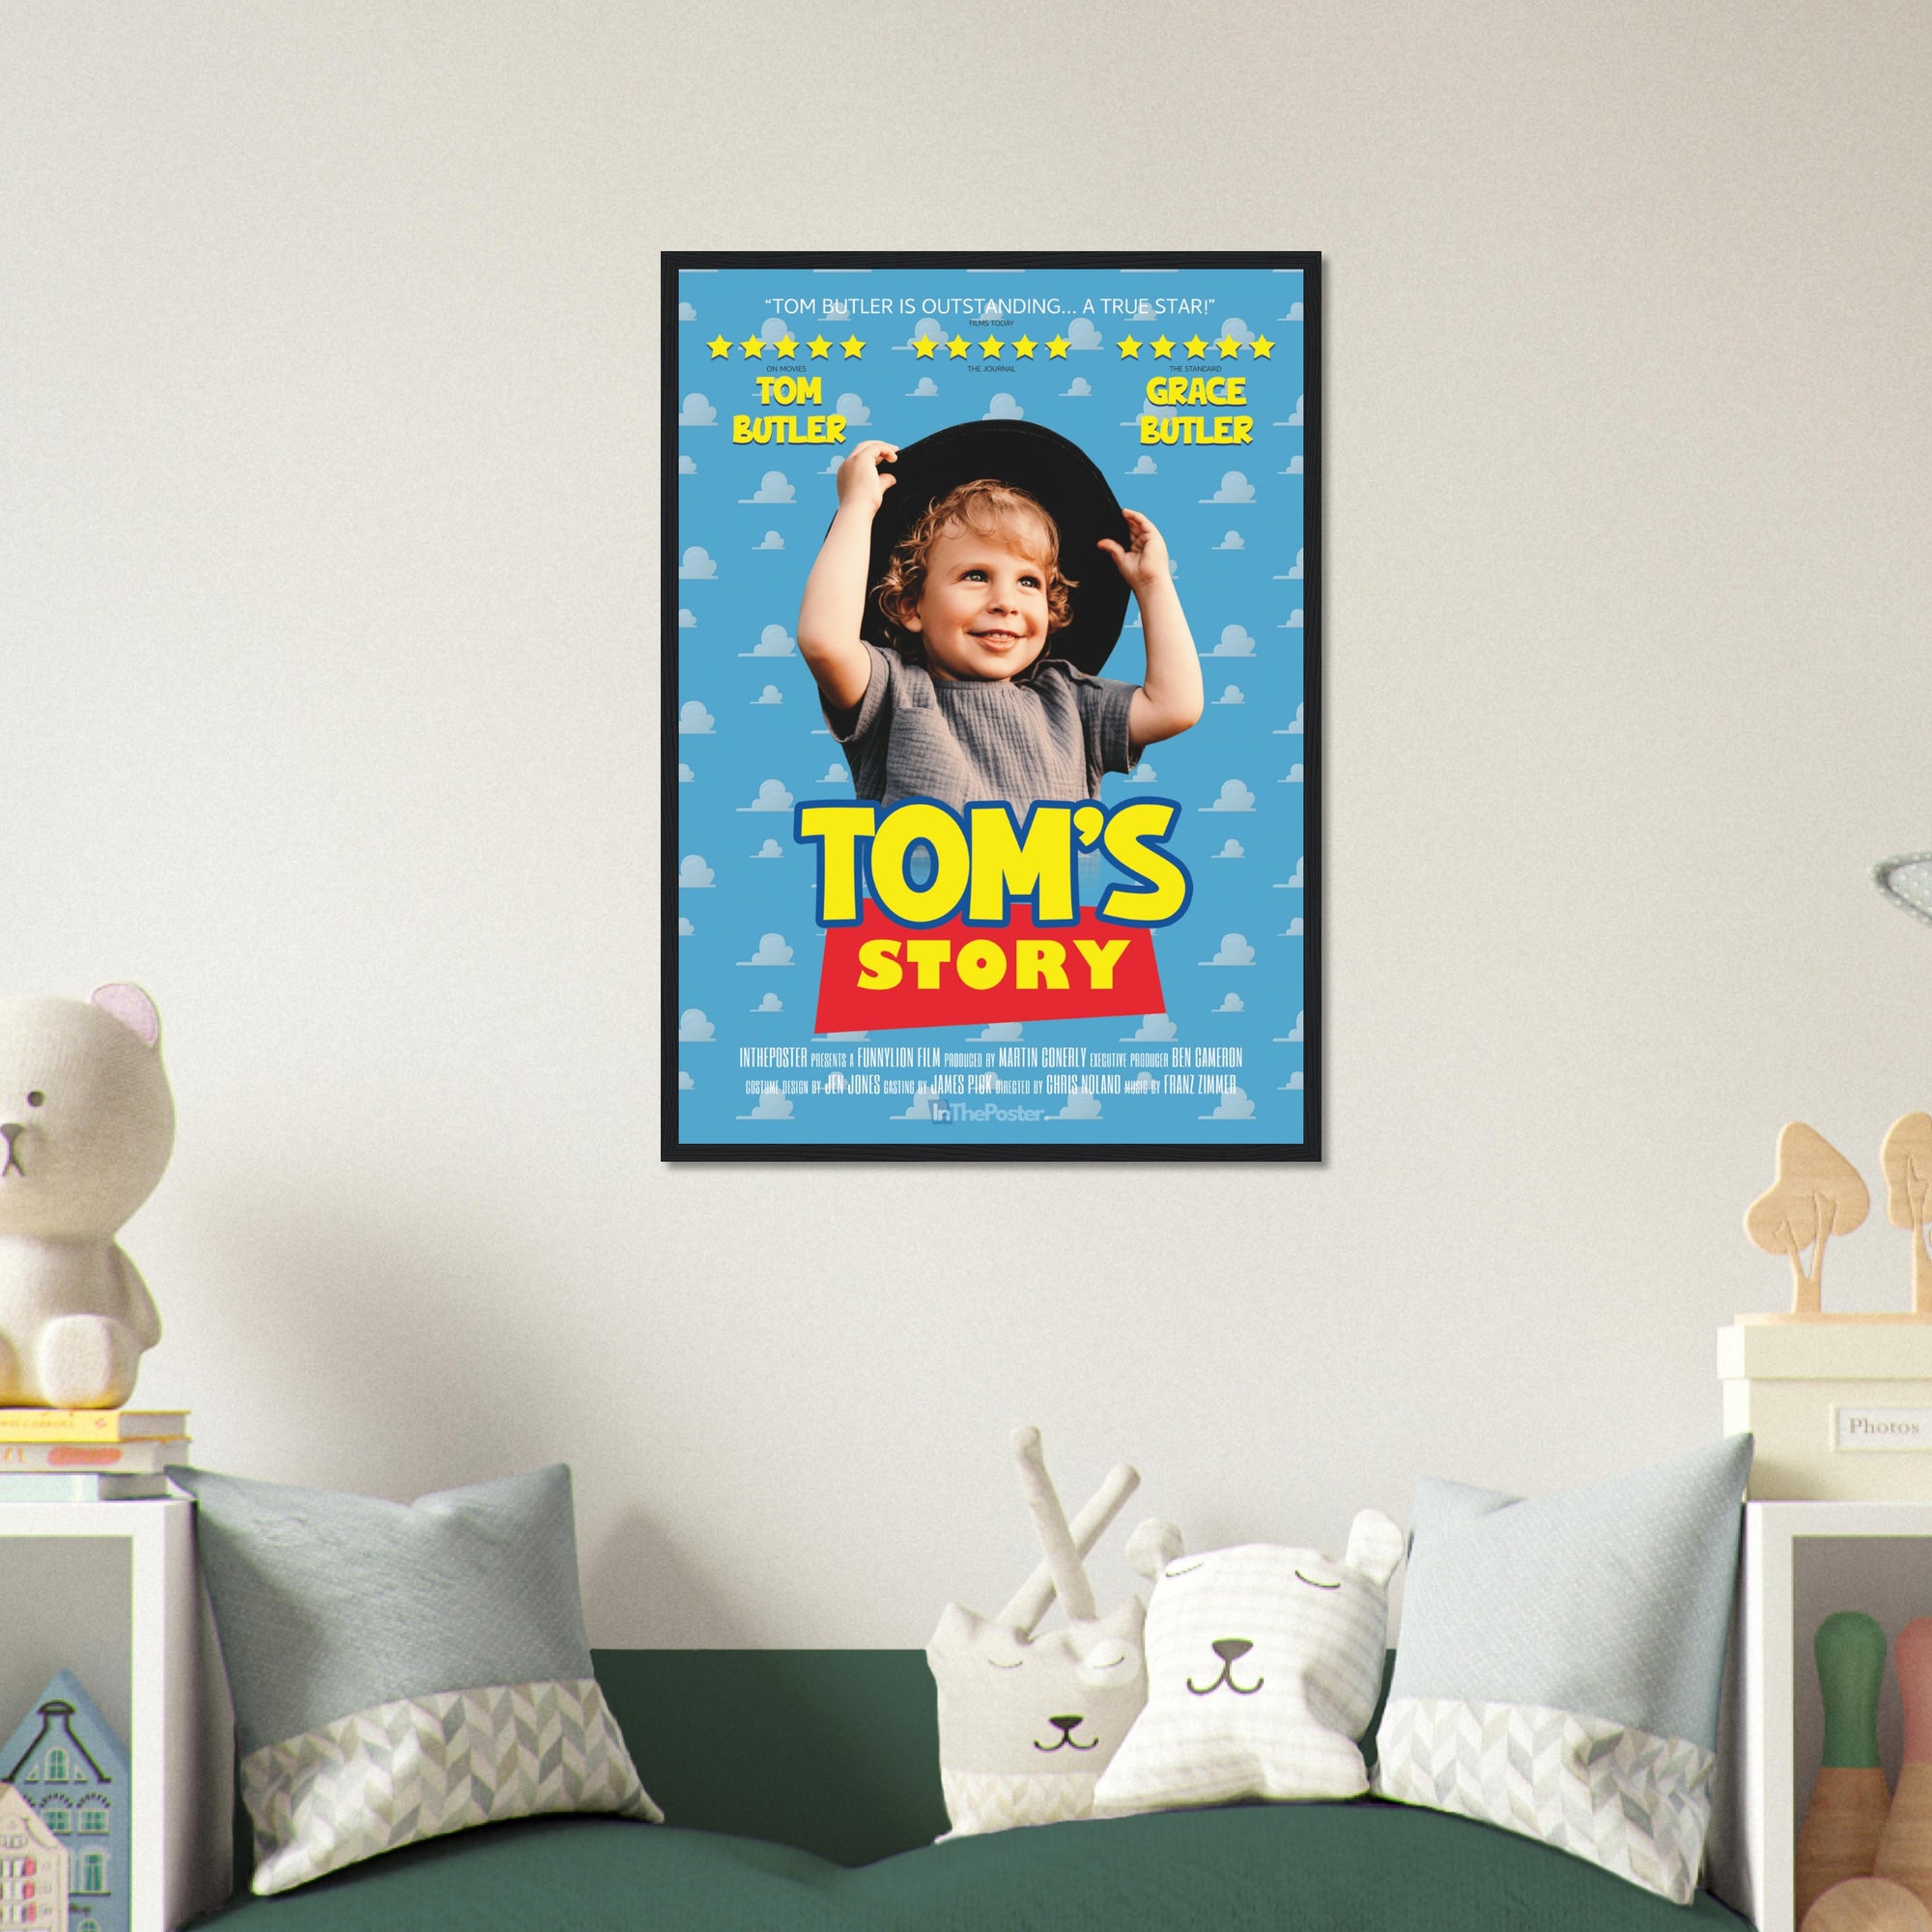 A Toy Story inspired movie poster design in a regular black frame, on a grey wall in a kids bedroom